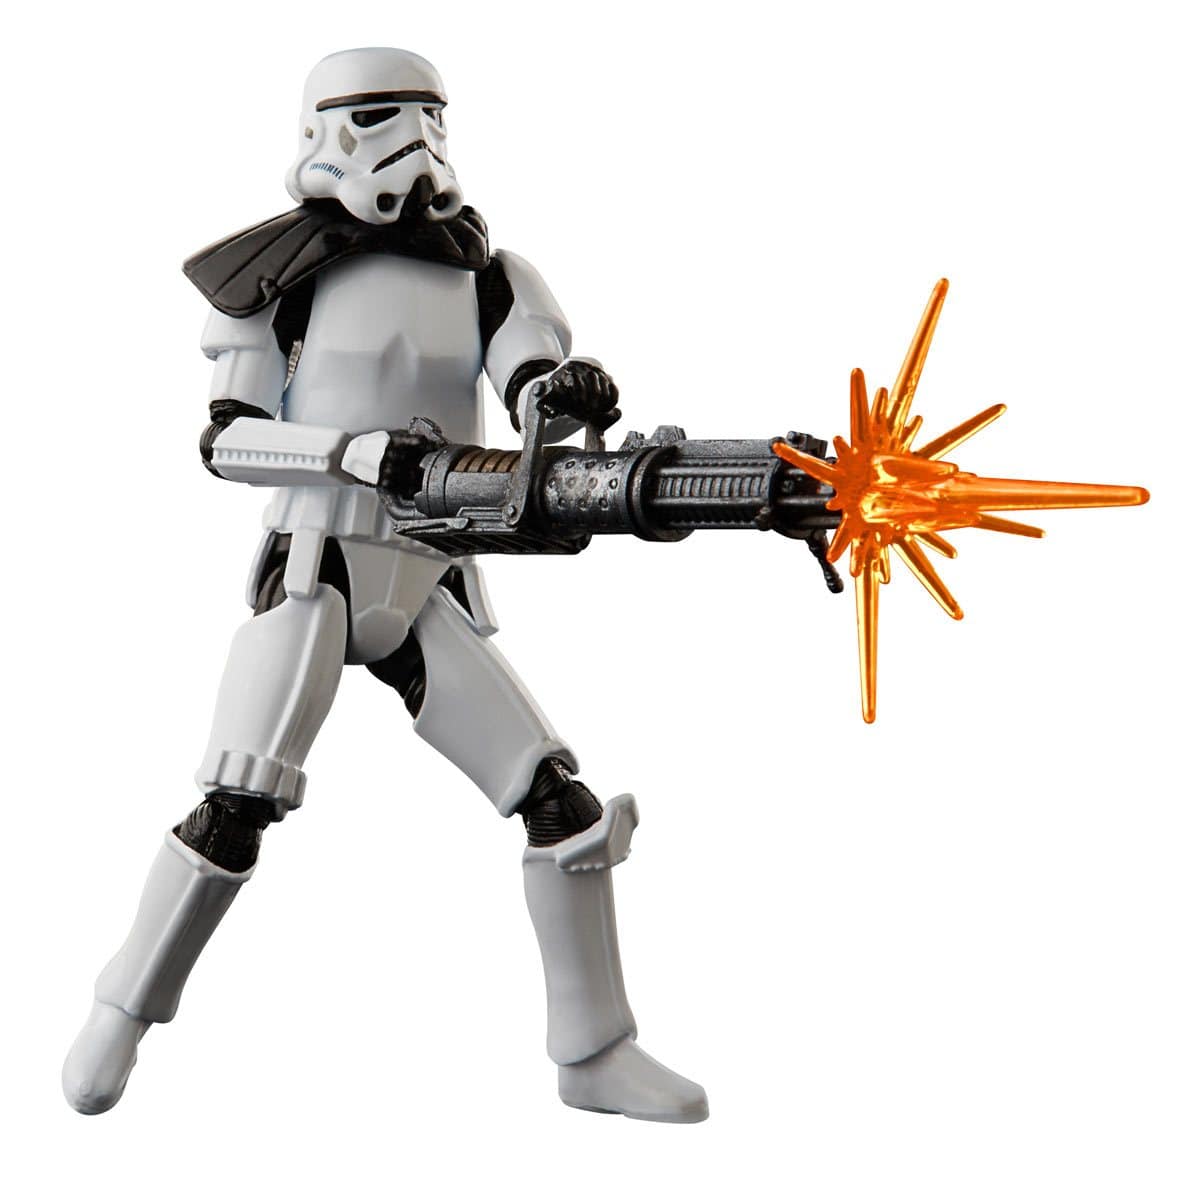 Star Wars The Vintage Collection Gaming Greats Heavy Assault Stormtrooper 3 3/4-Inch Action Figure Pop-O-Loco